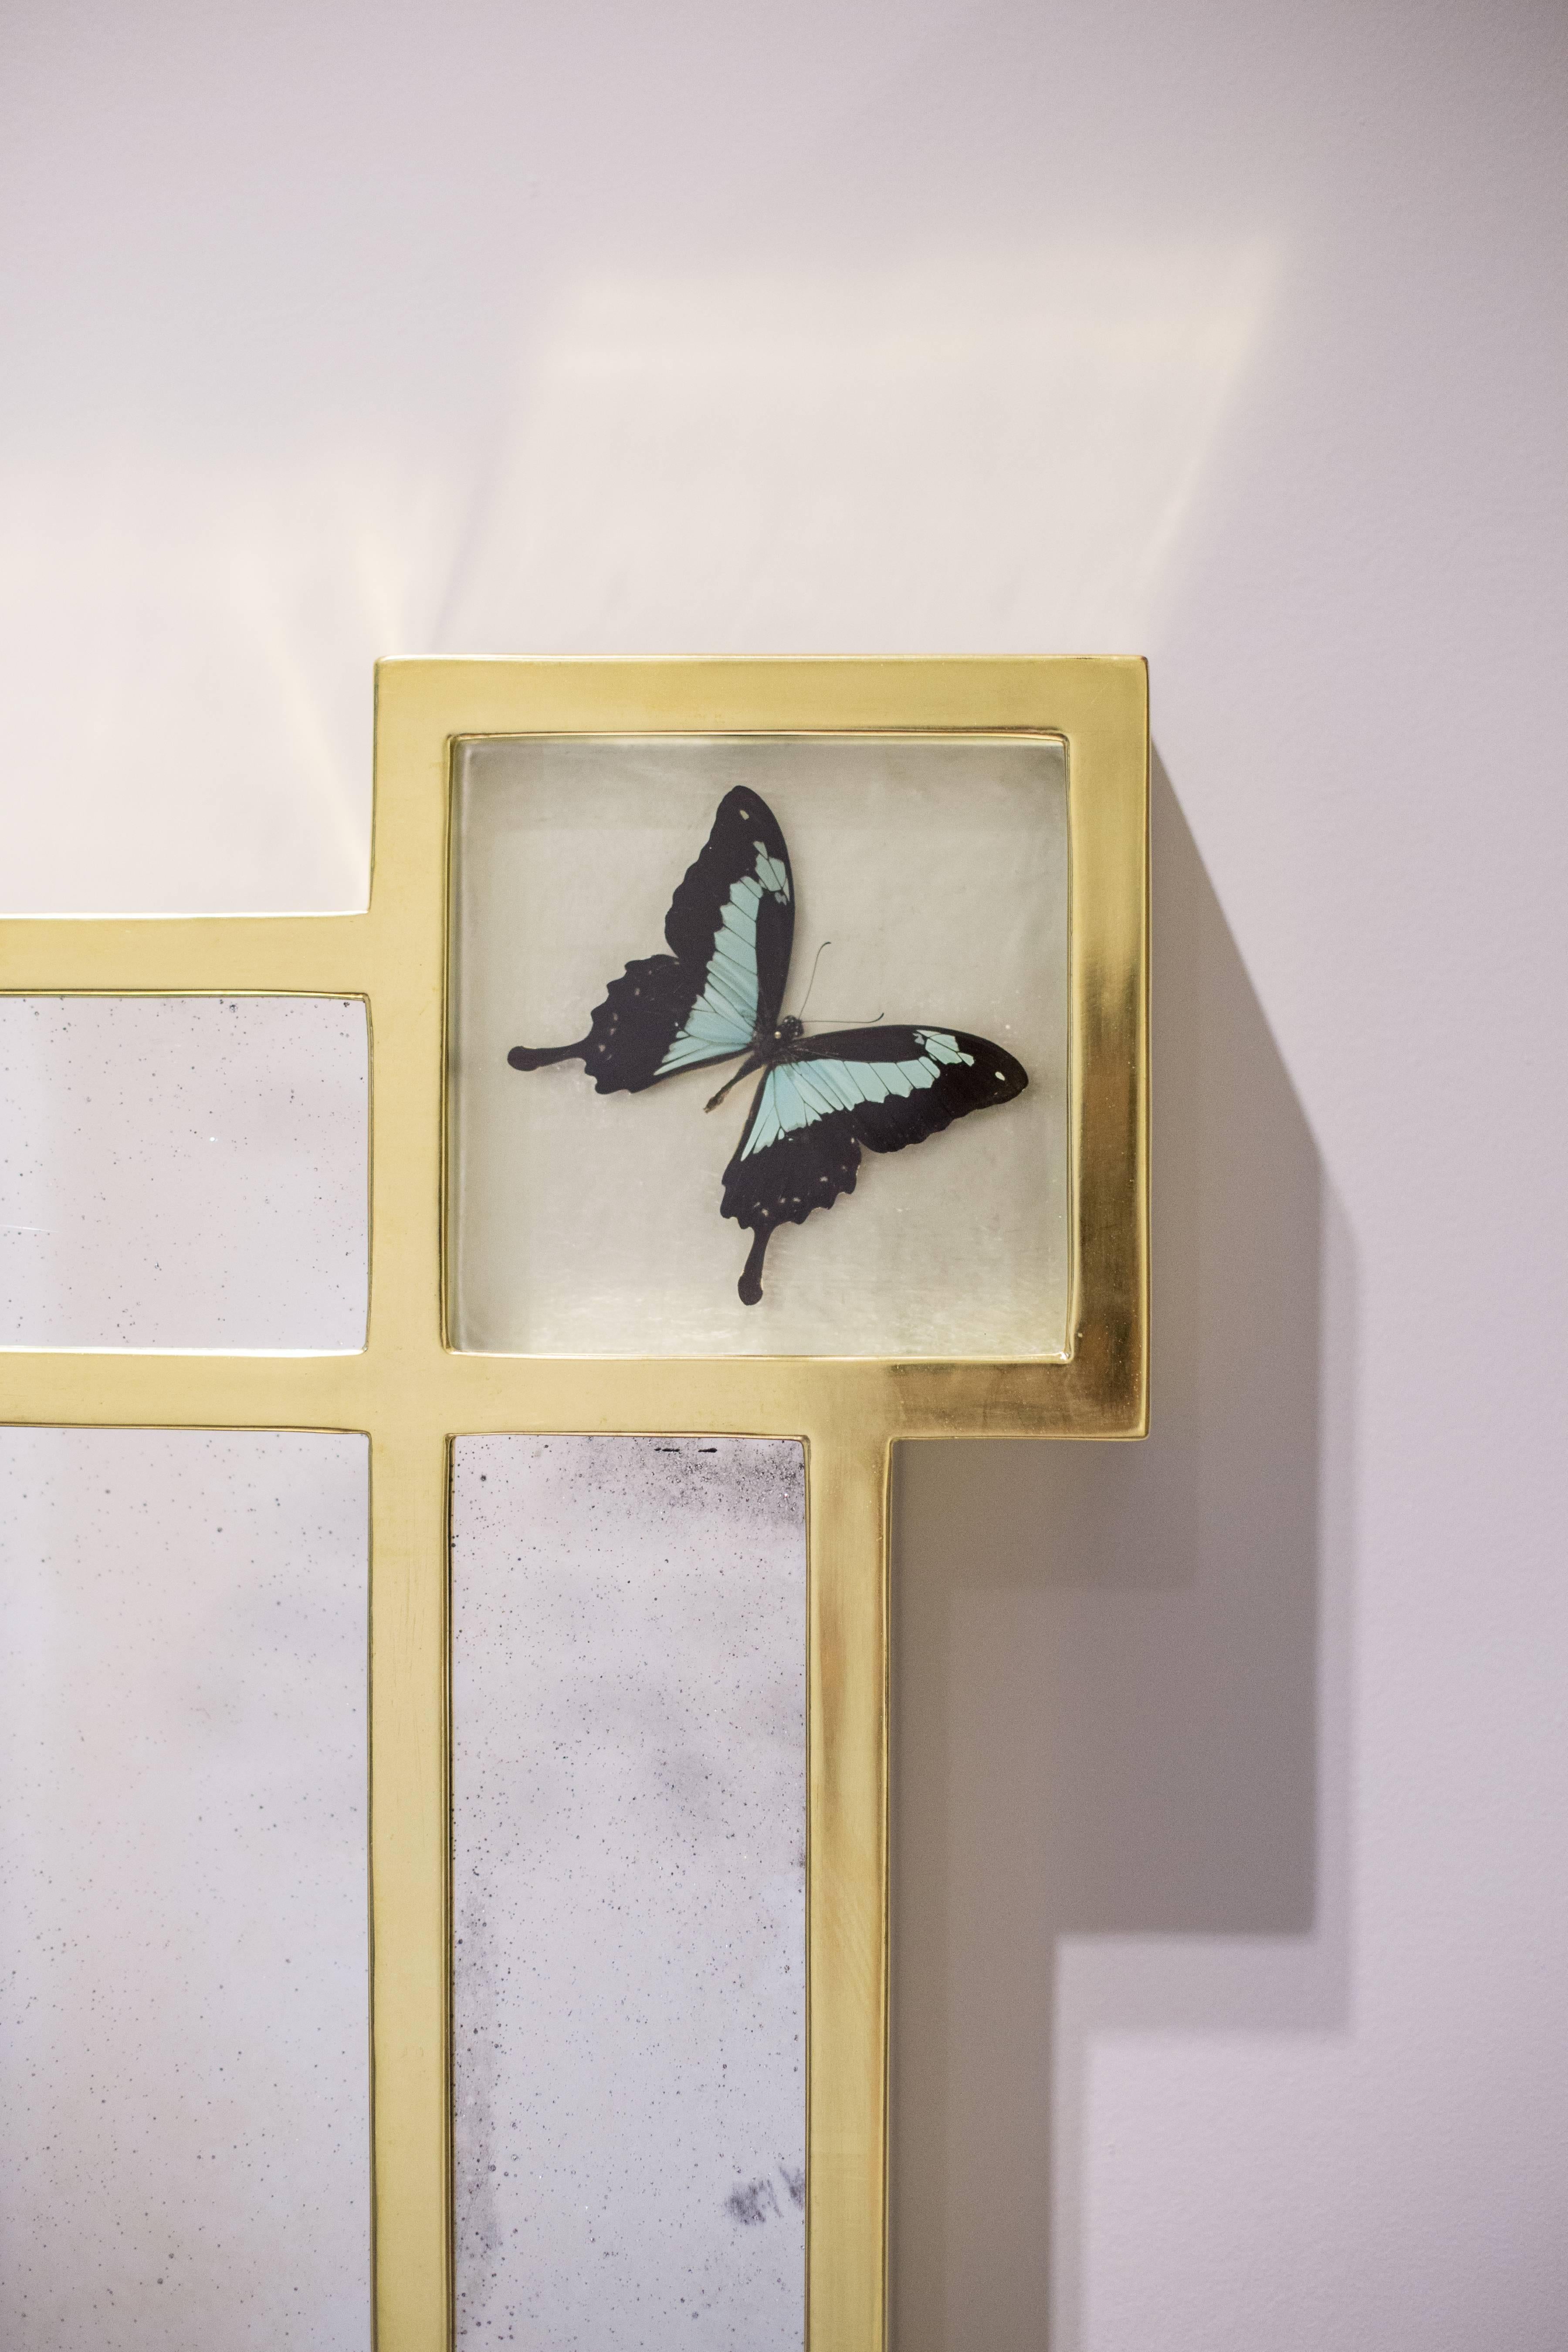 The frame is water gilded with 22 carat gold leaf and has a box in each corner containing a turquoise and black swallow butterfly. The interiors of the boxes are oil gilded with pale lemon 16.9 carat gold leaf. The mirror glass is hand drawn and